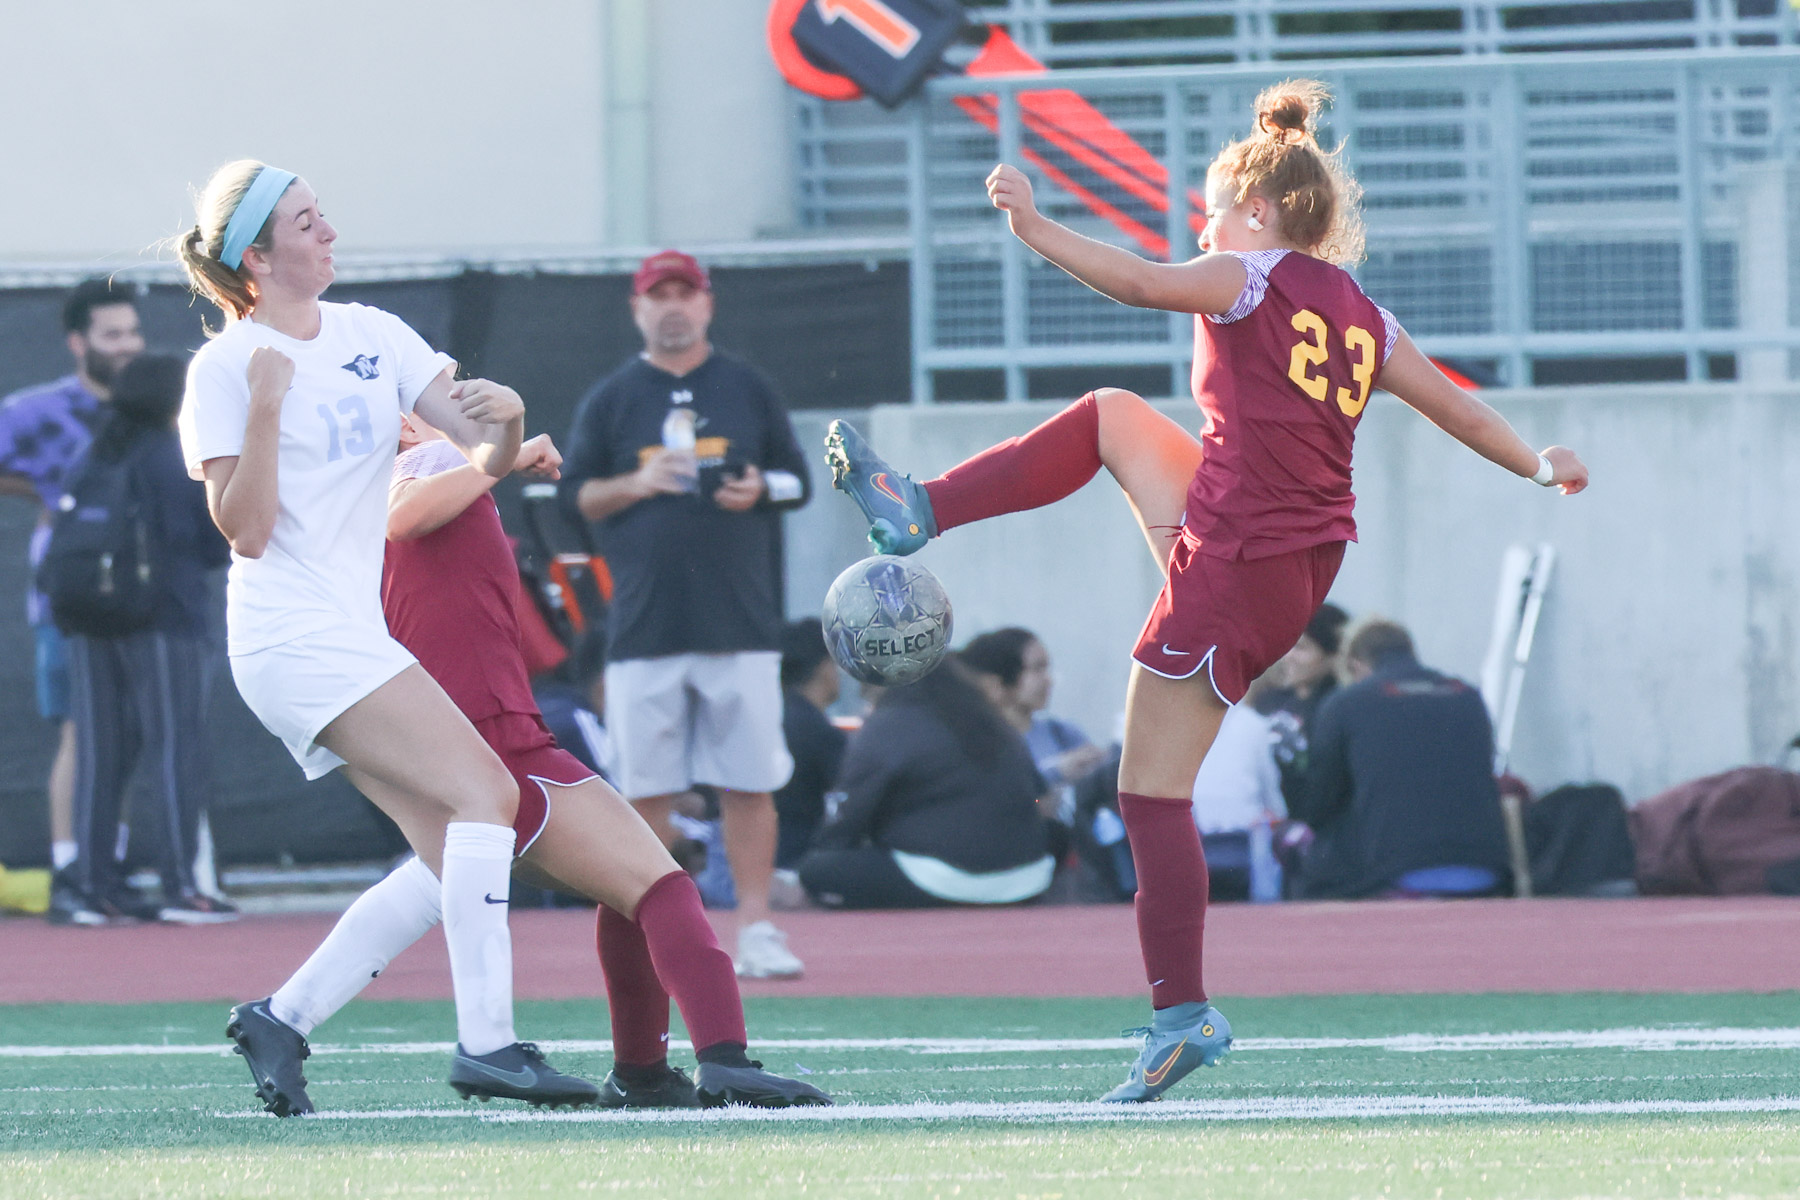 Angie Grigoryan (23) ended up with the big goal in PCC's tie on Tuesday (photo by Richard Quinton).